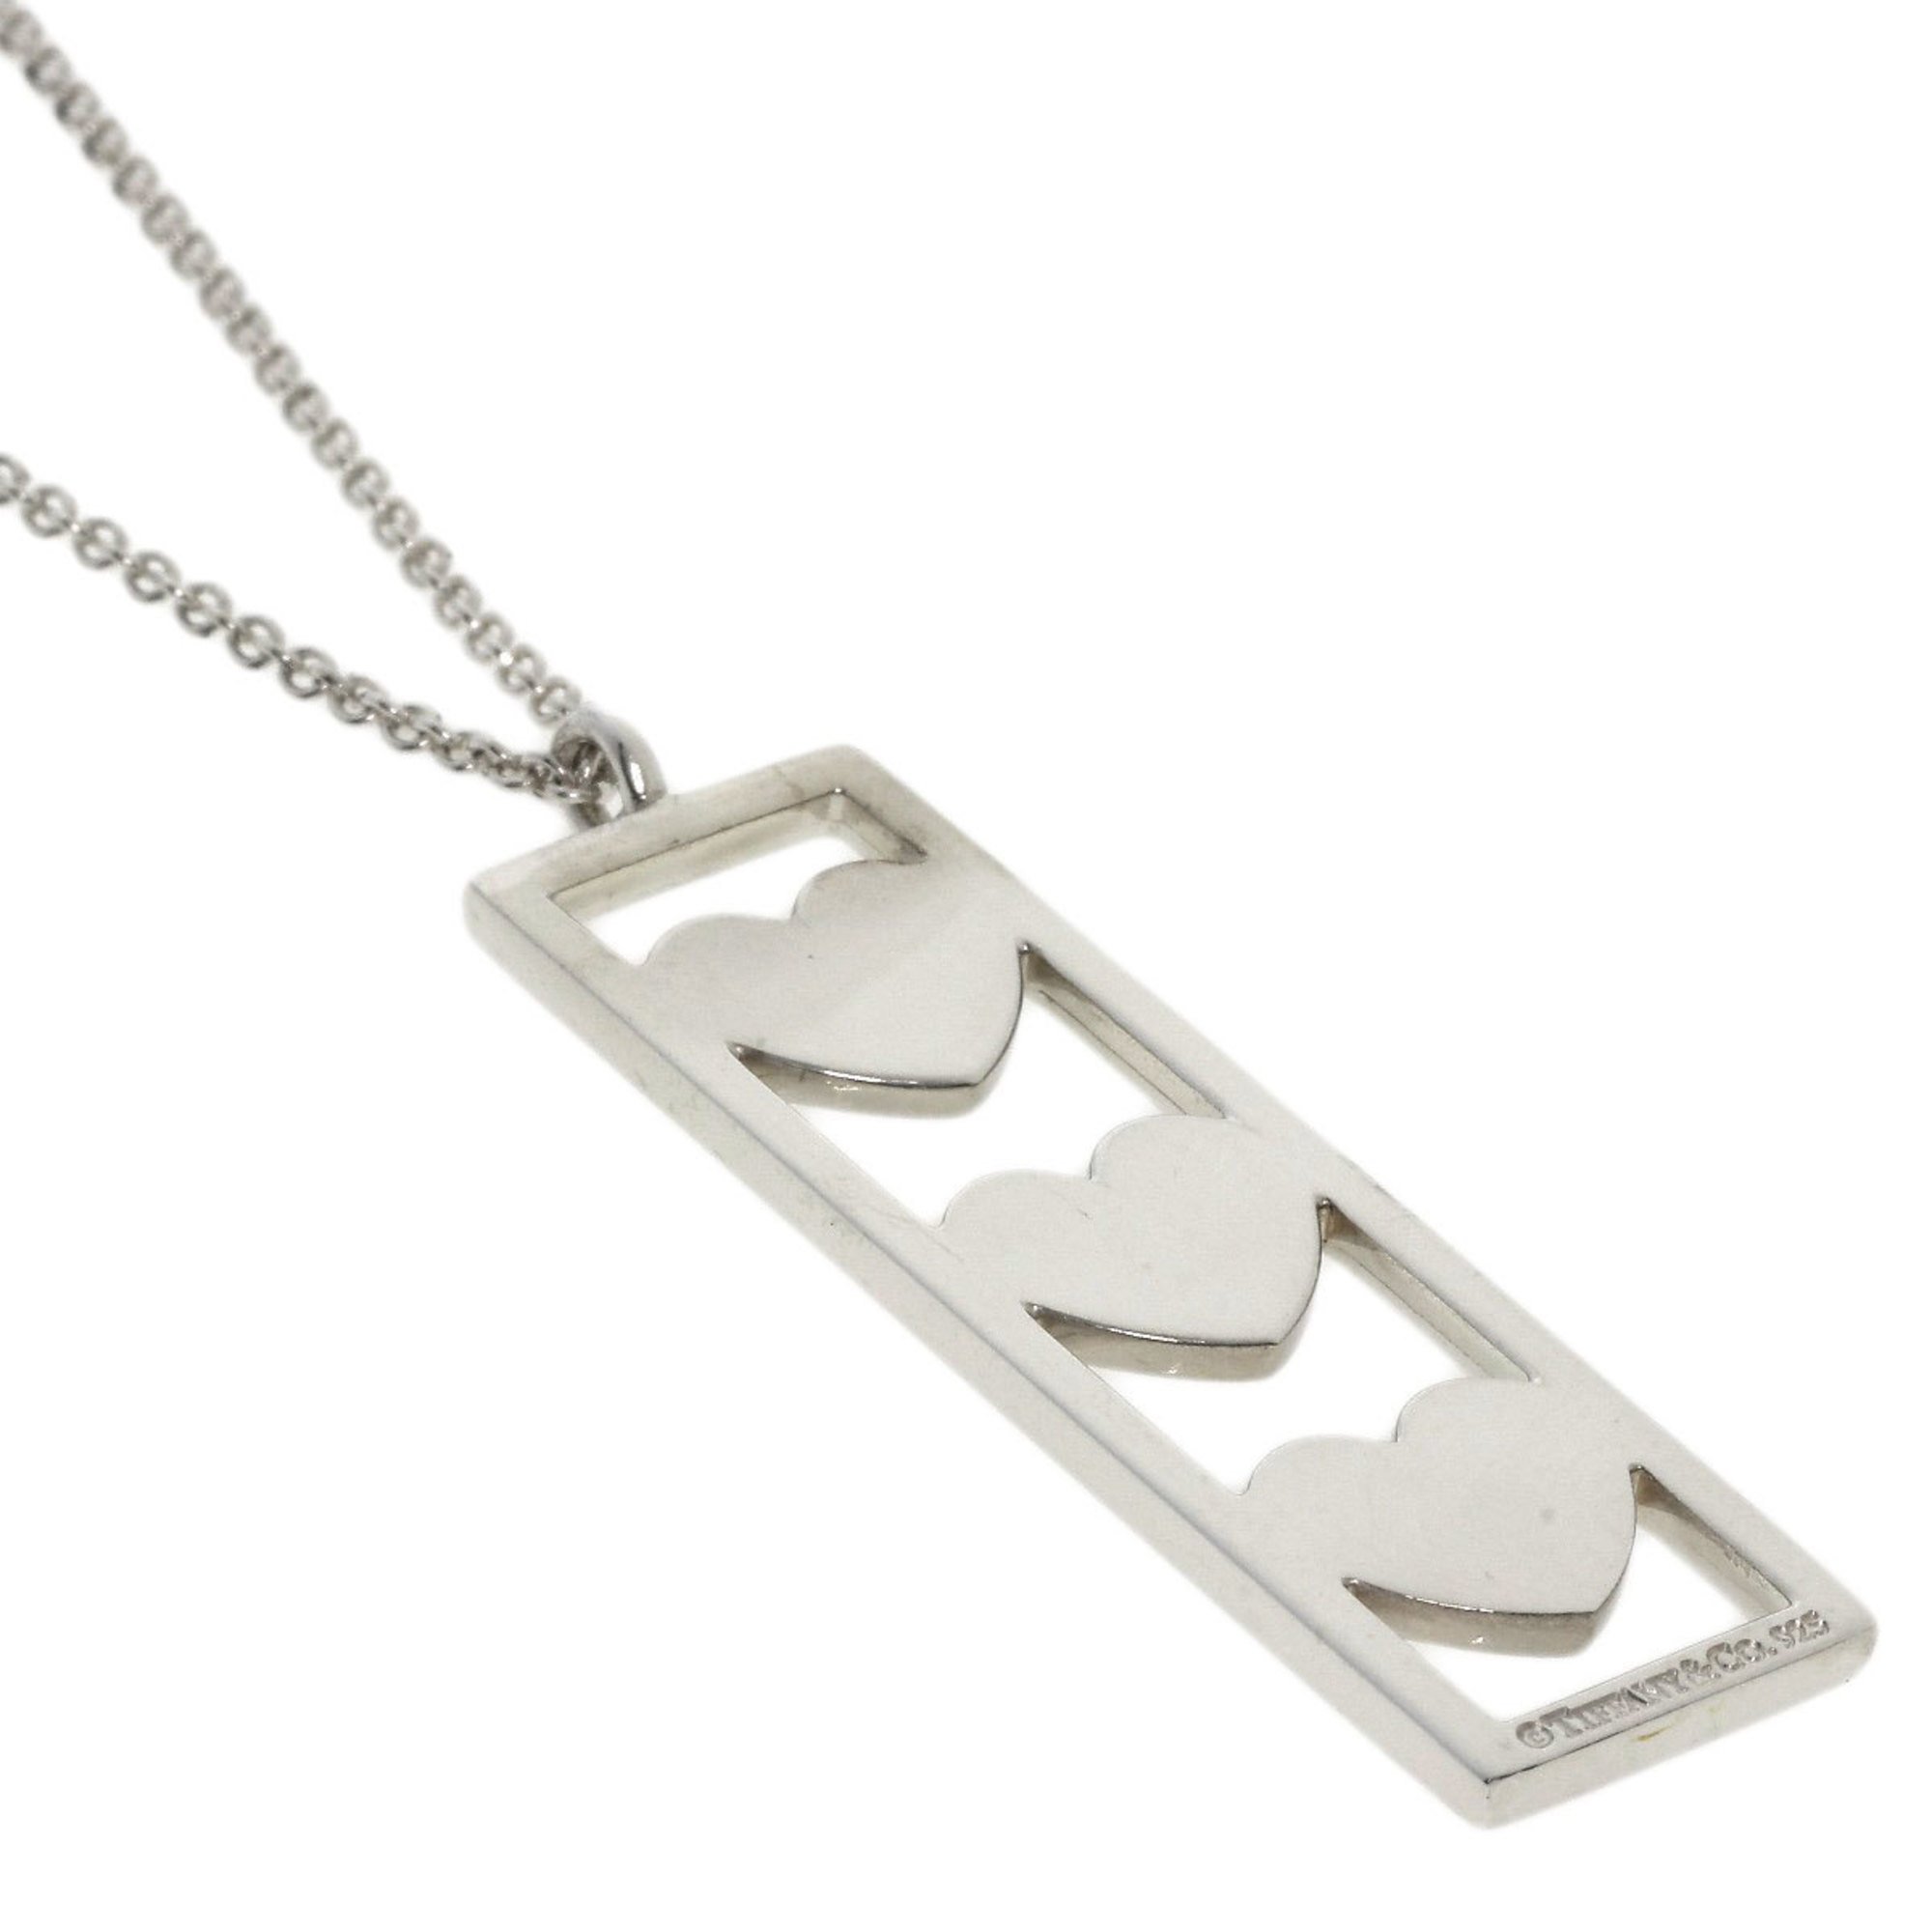 Tiffany triple heart plate necklace silver ladies